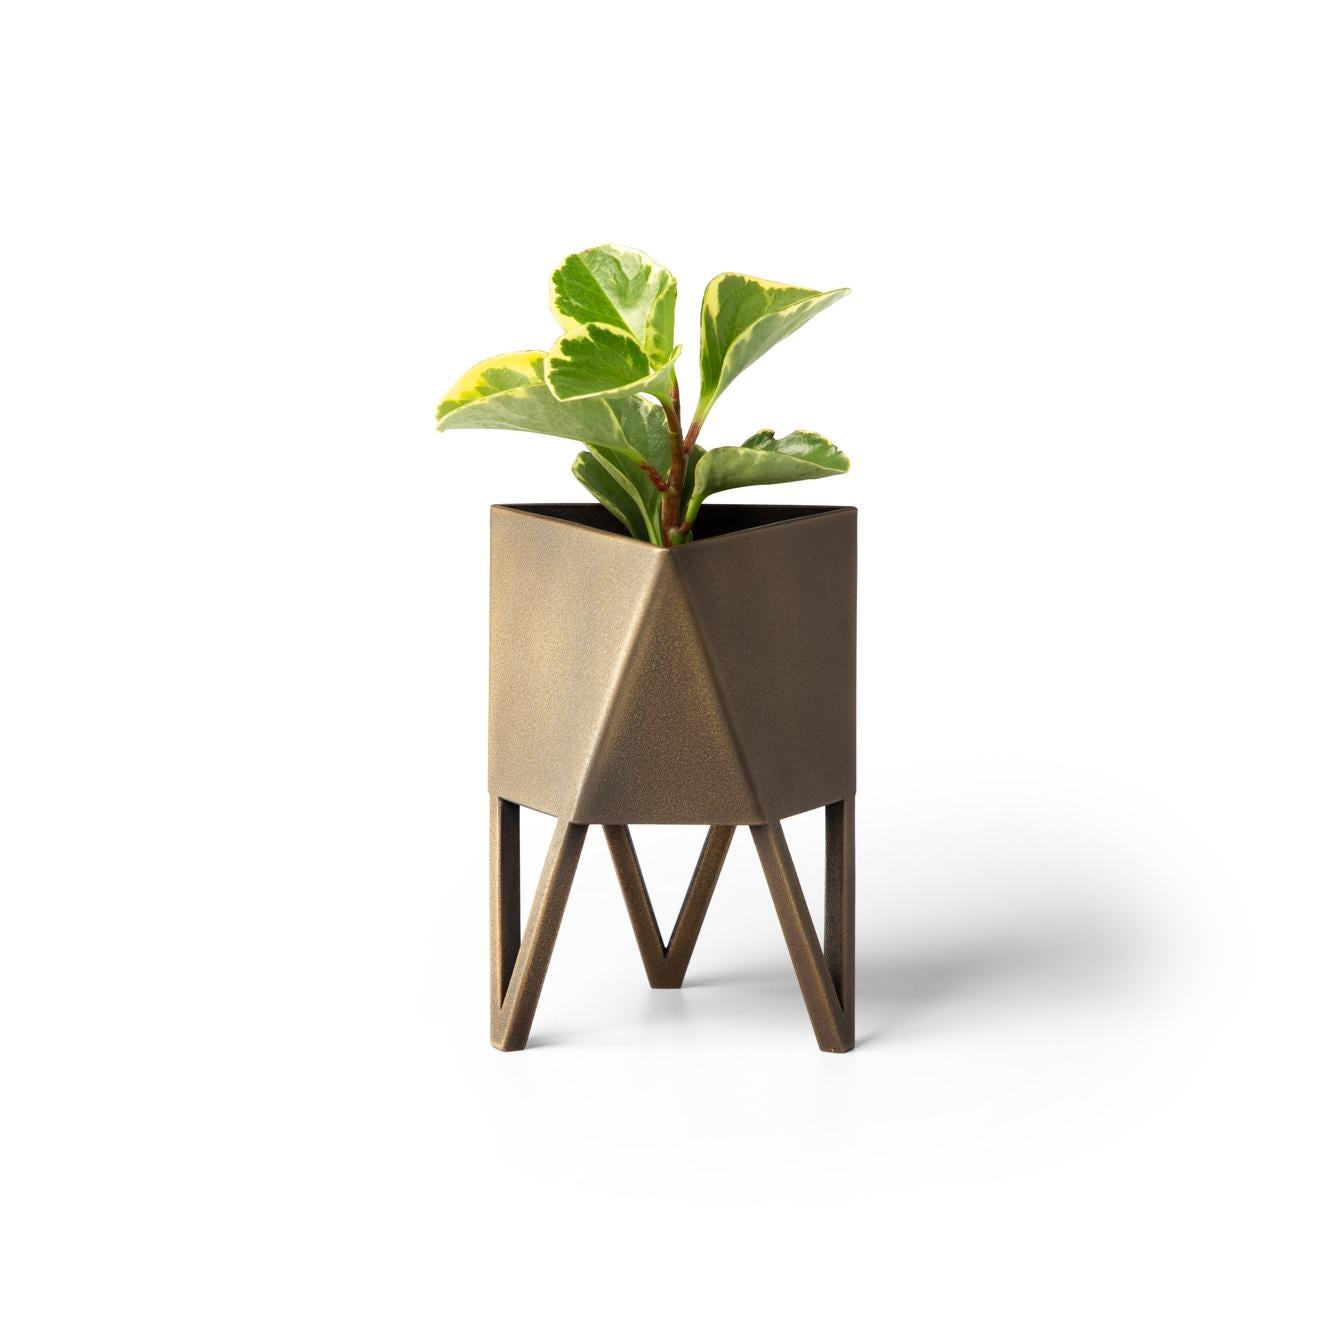 Deca Planter in Mineral, Small, by Force/Collide, 2023 9